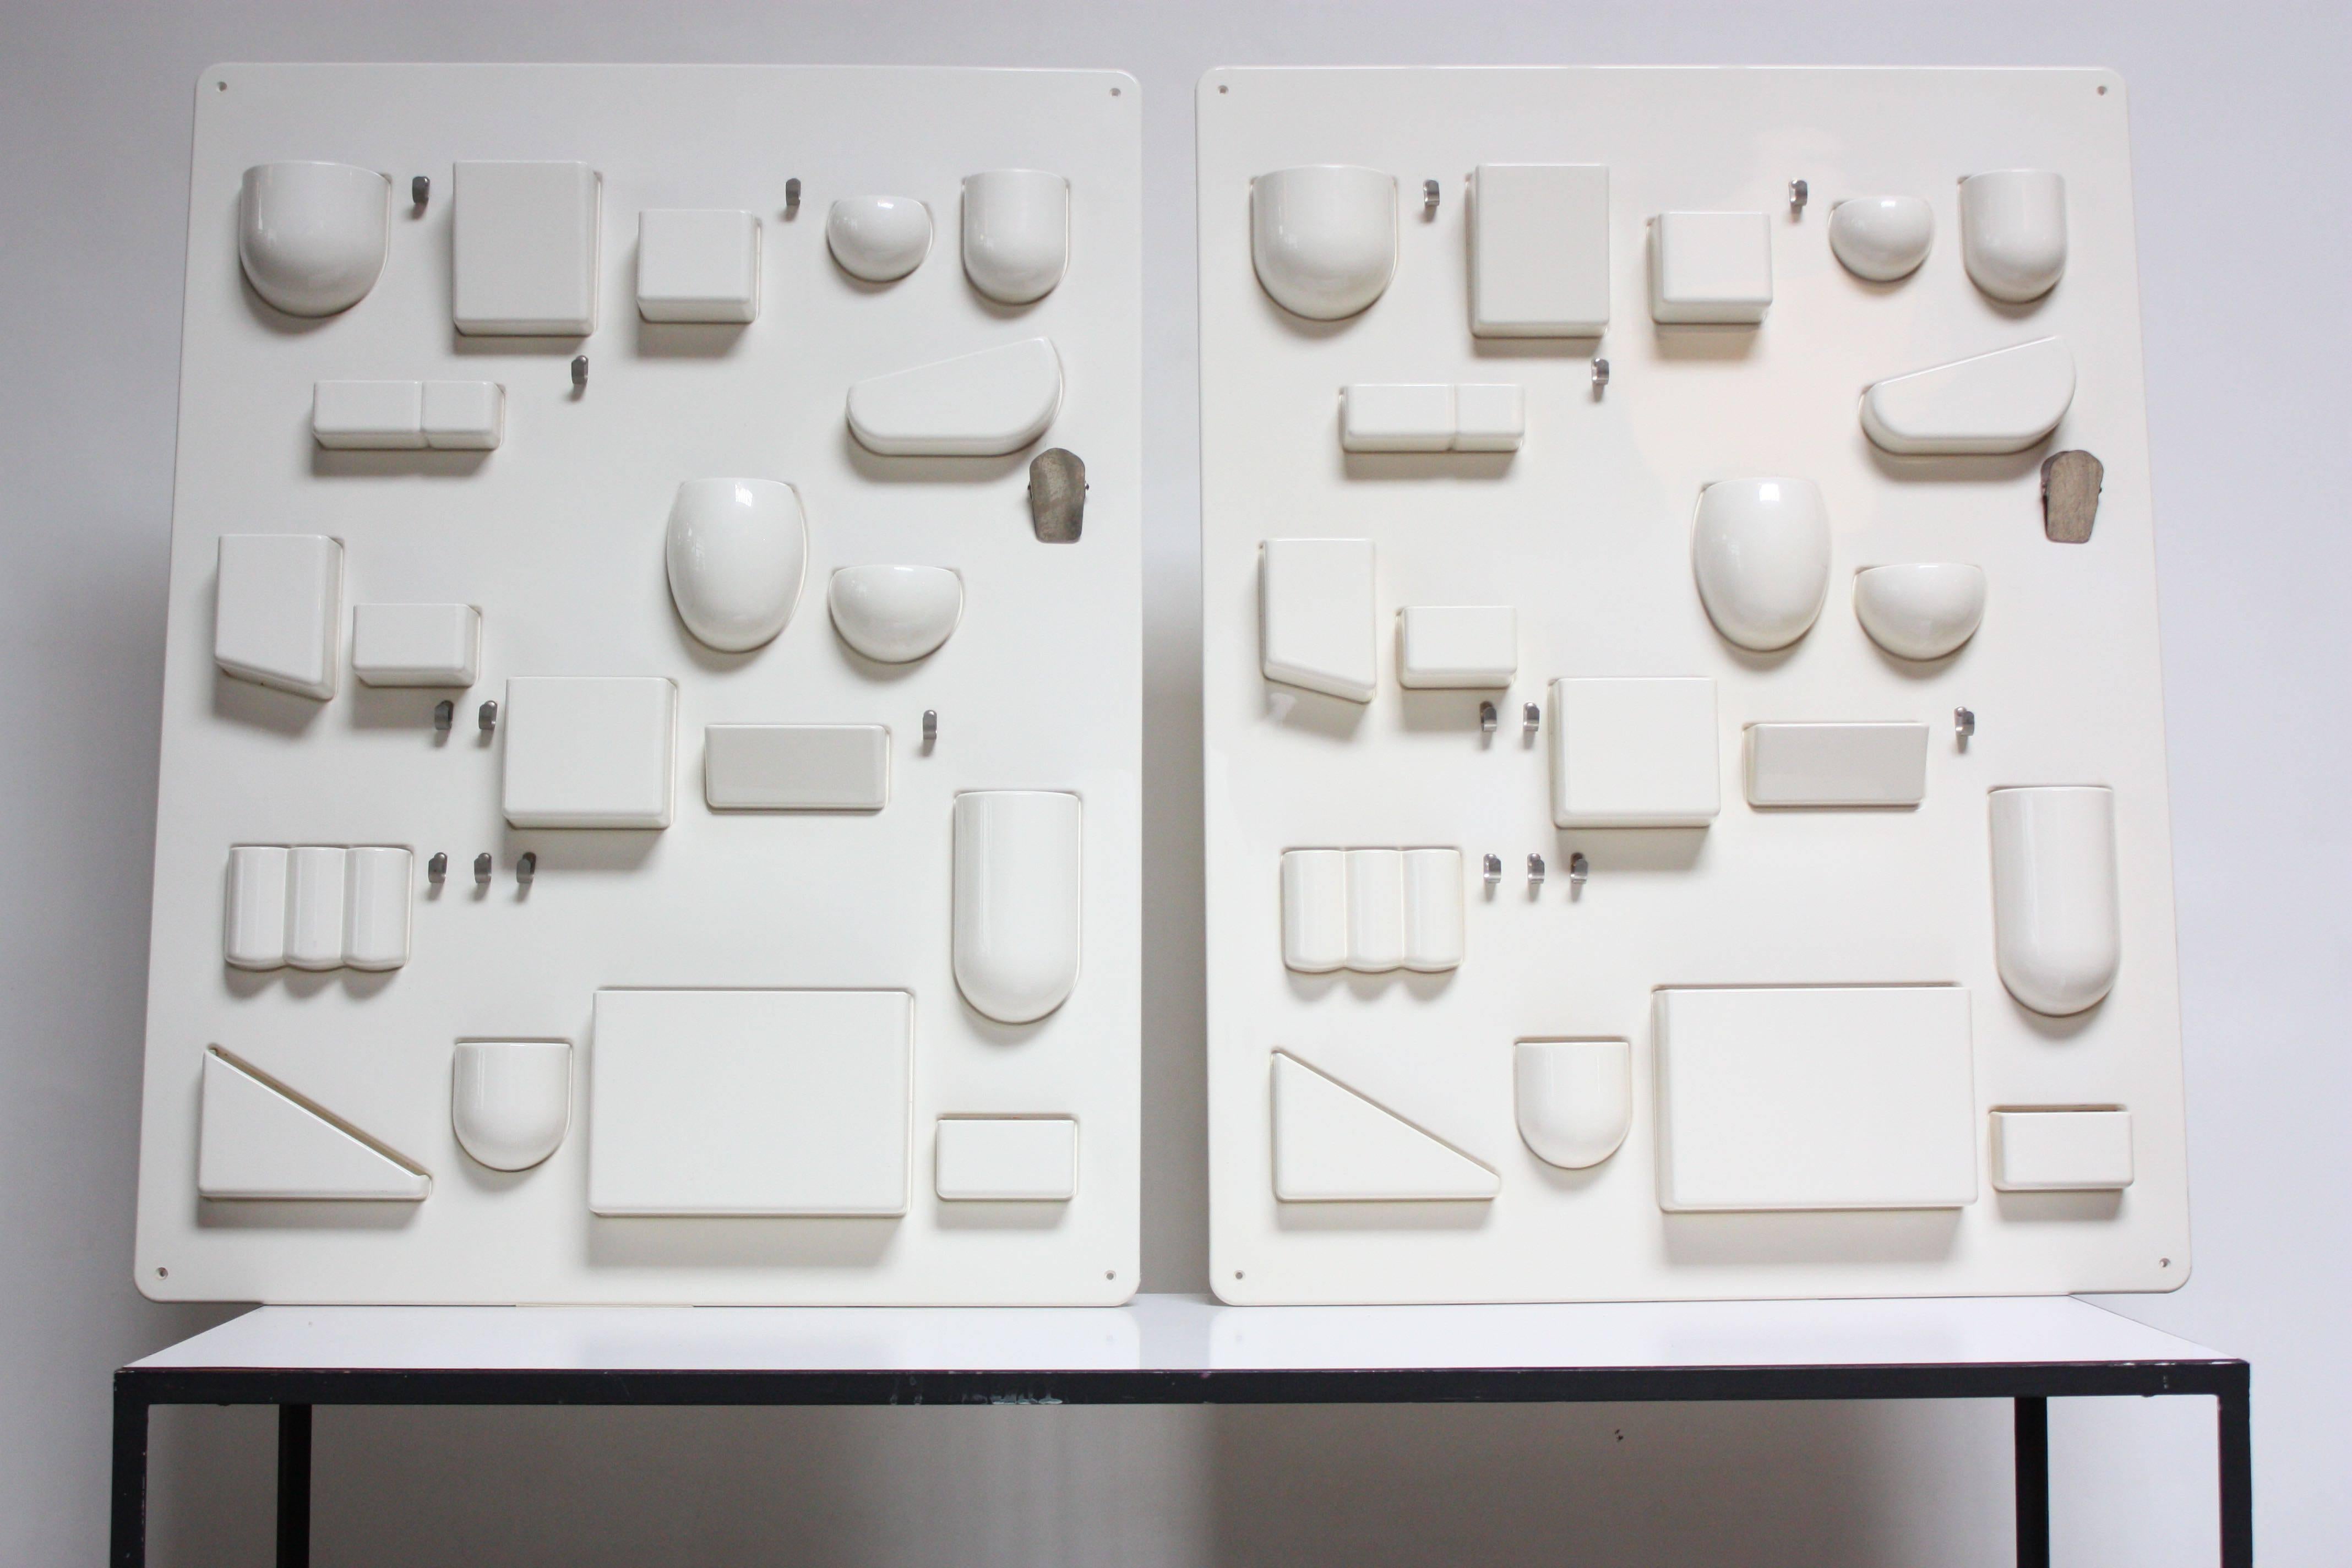 Pair of molded plastic Uten.Silos / Wall-Alls designed by Dorothee Maurer-Becker for Design M. These early examples in white (circa 1969, Germany) measure 34.25